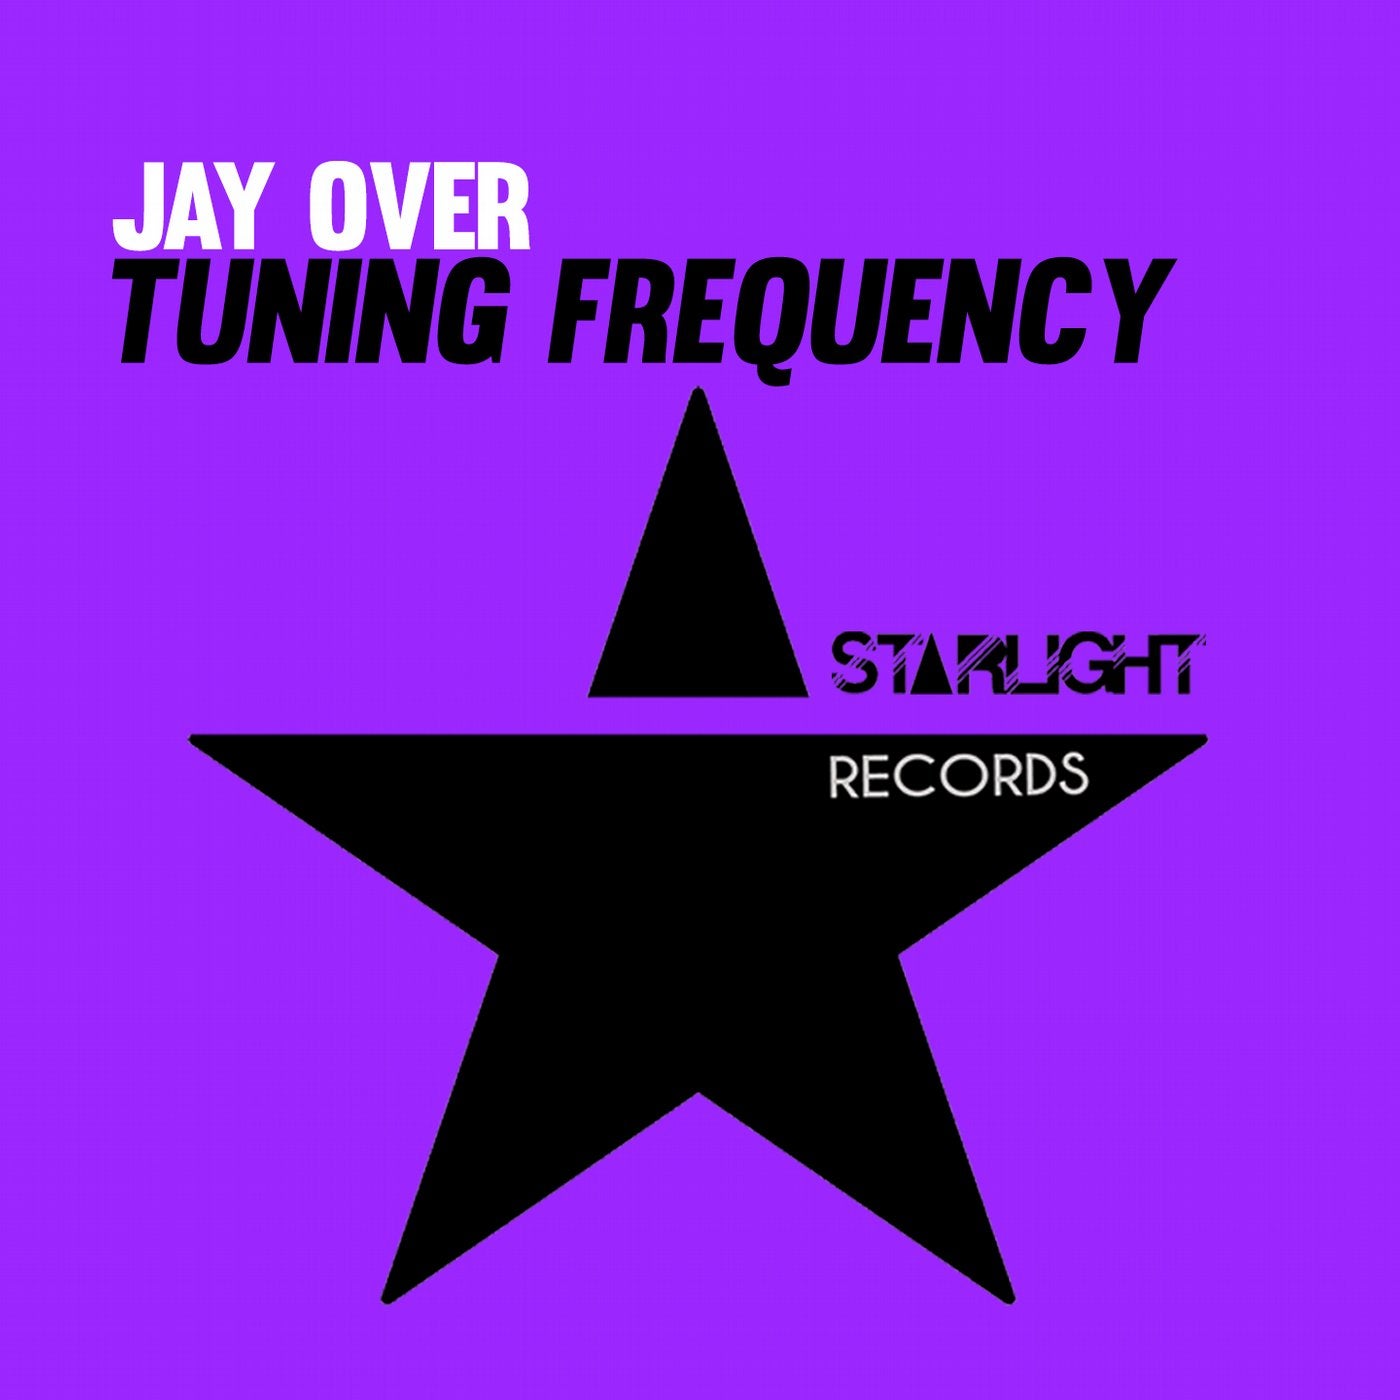 Tuning Frequency